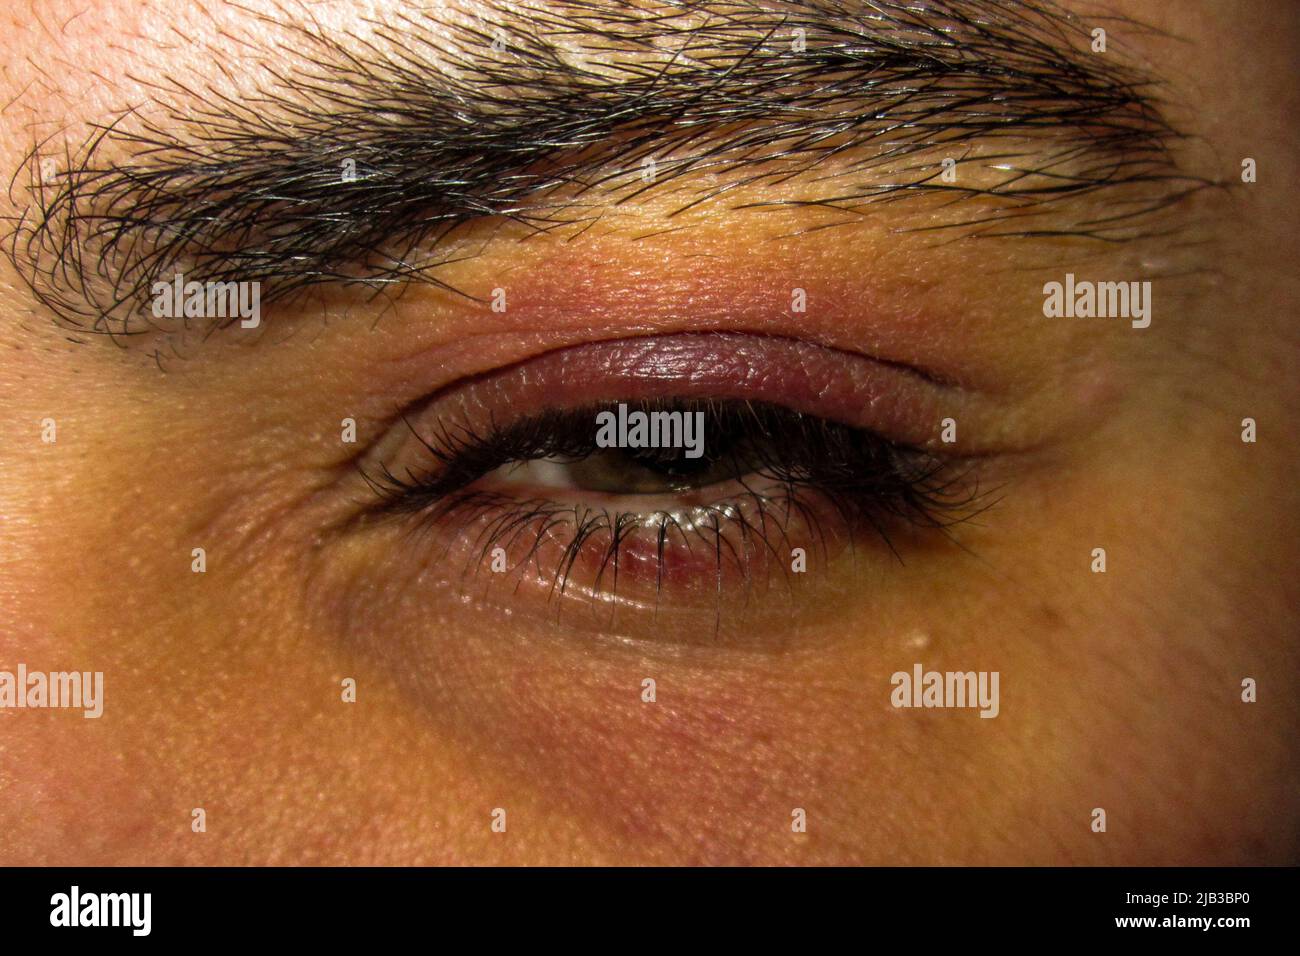 A person having a eye infection. Rennes city. Illustrations of the city of Rennes. France. Stock Photo